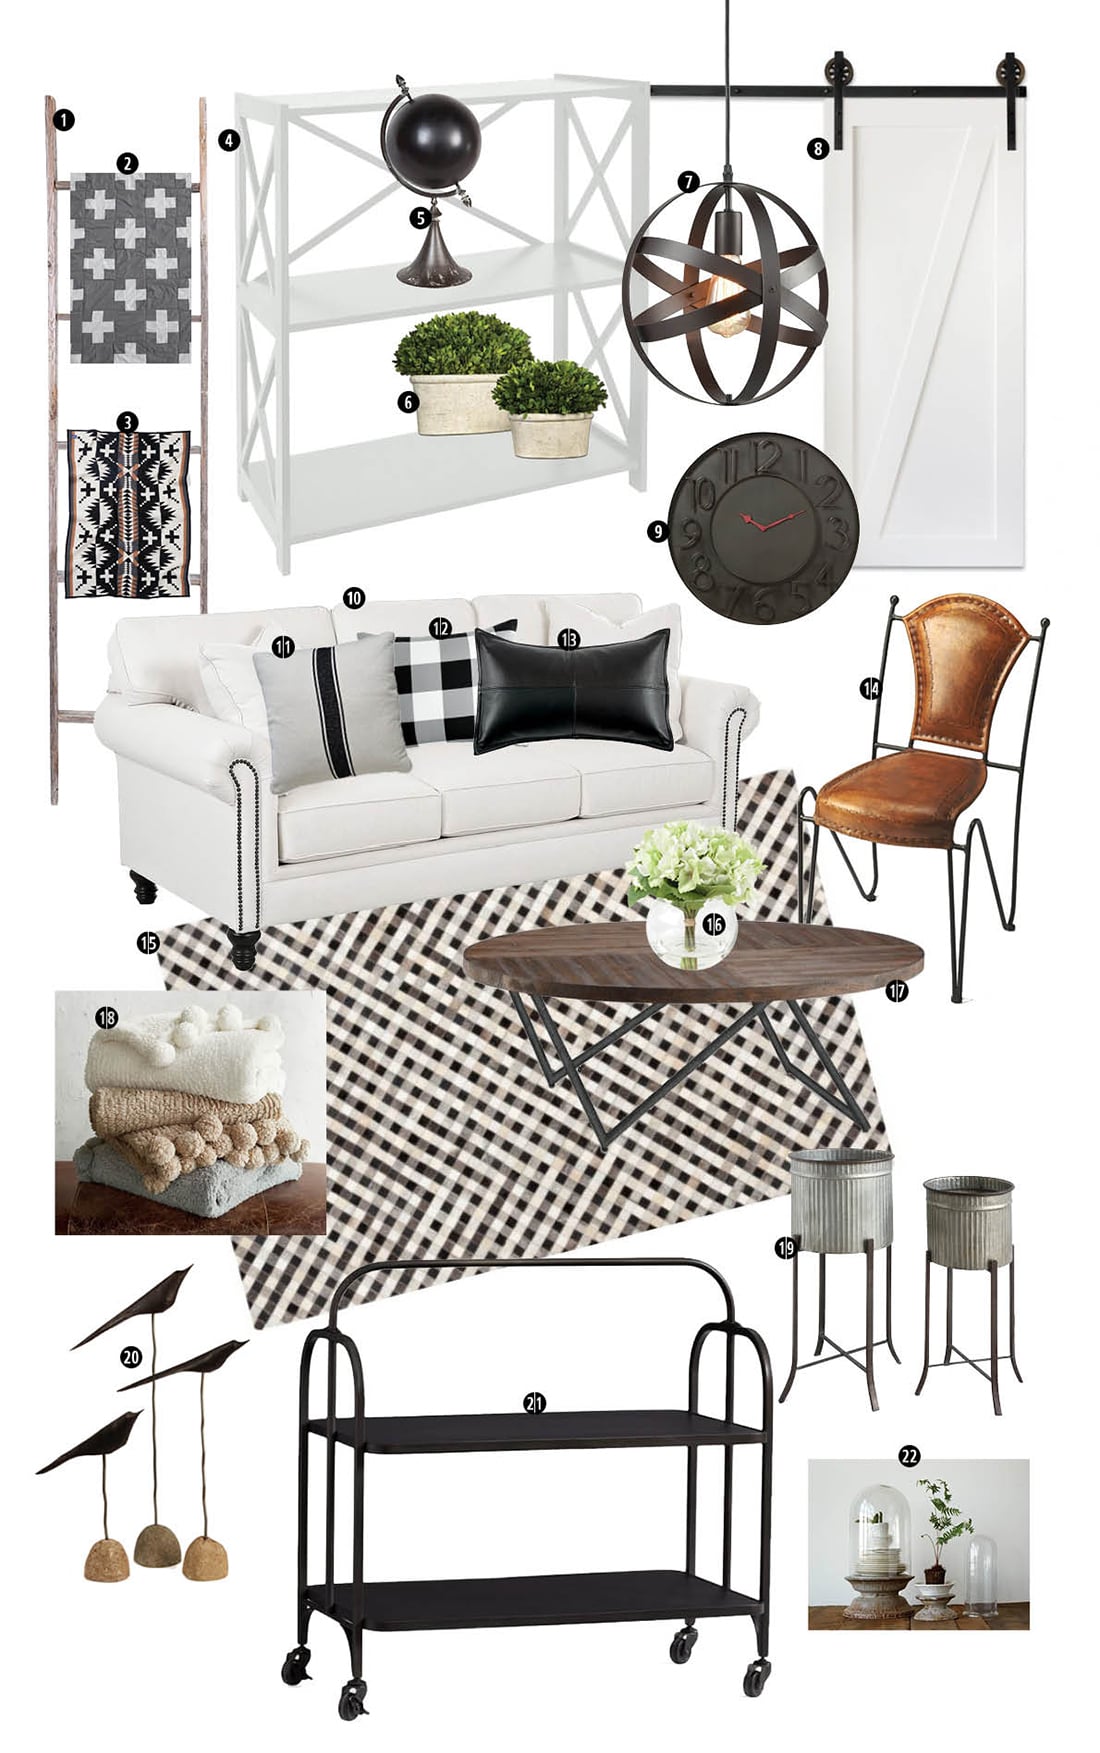 8 Signs Modern Farmhouse Decor is the Right Home Style for You • Little Gold Pixel • Click through to find out if you're compatible with farmhouse decor!